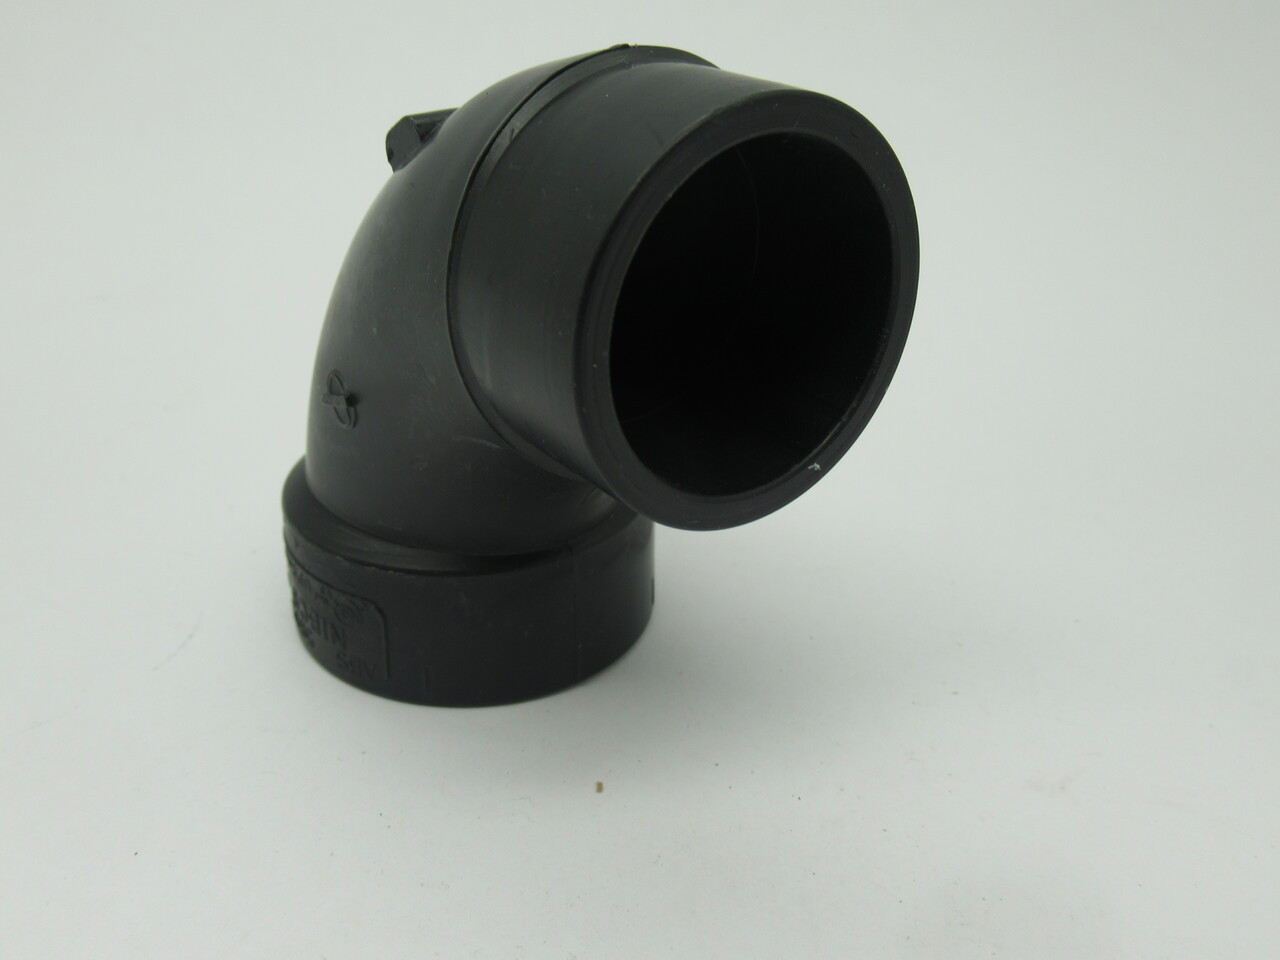 Nibco 5807-2 ABS Fitting 1-1/4" 90 Degree Elbow NOP